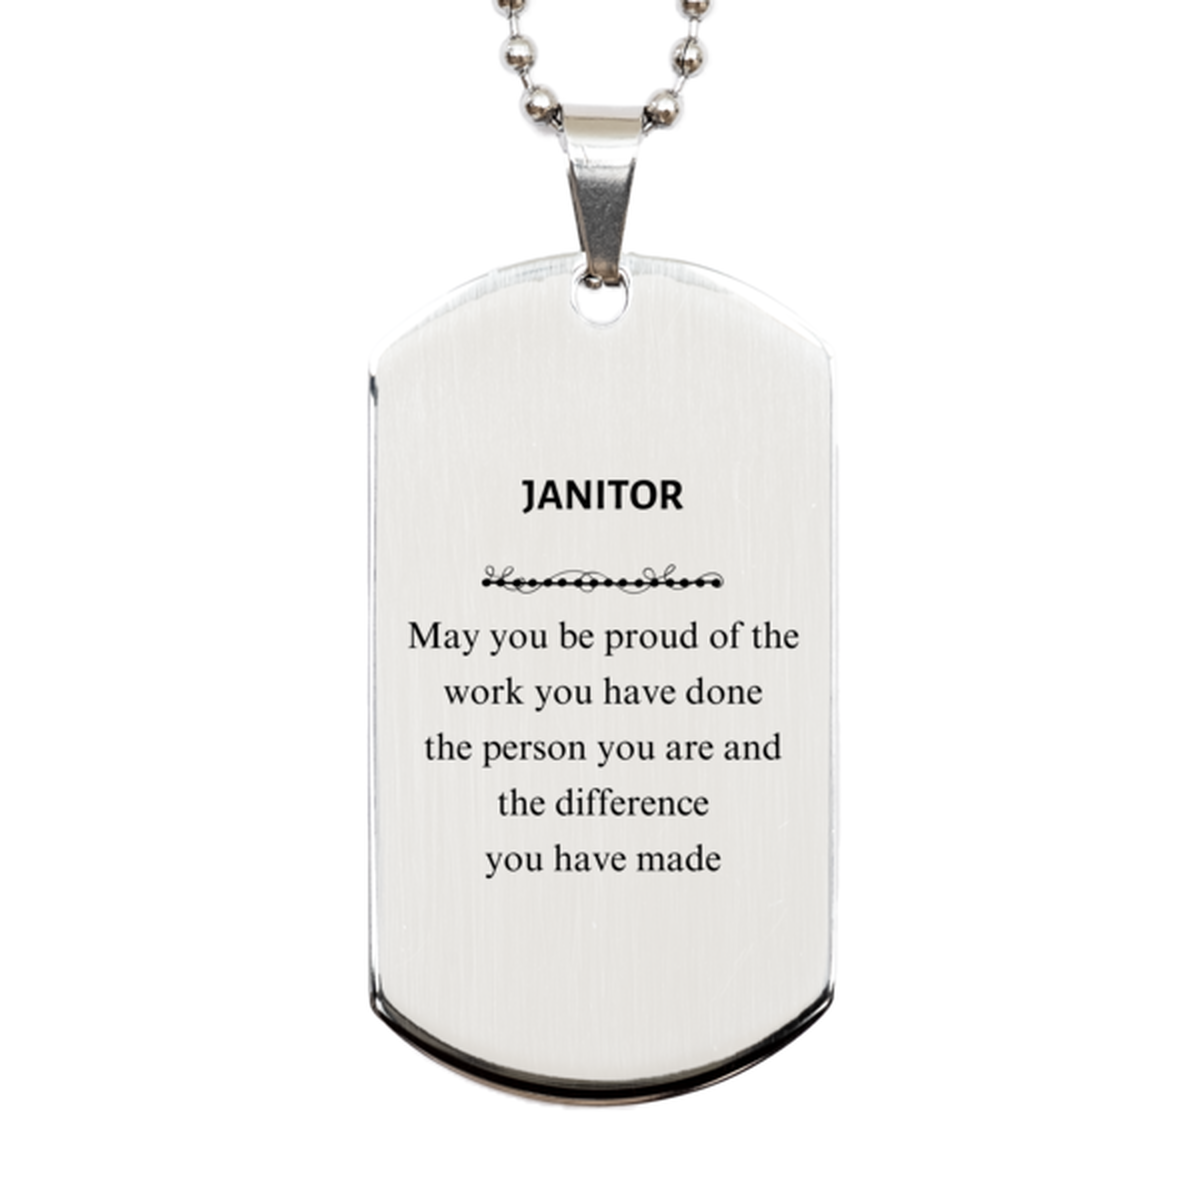 Janitor May you be proud of the work you have done, Retirement Janitor Silver Dog Tag for Colleague Appreciation Gifts Amazing for Janitor